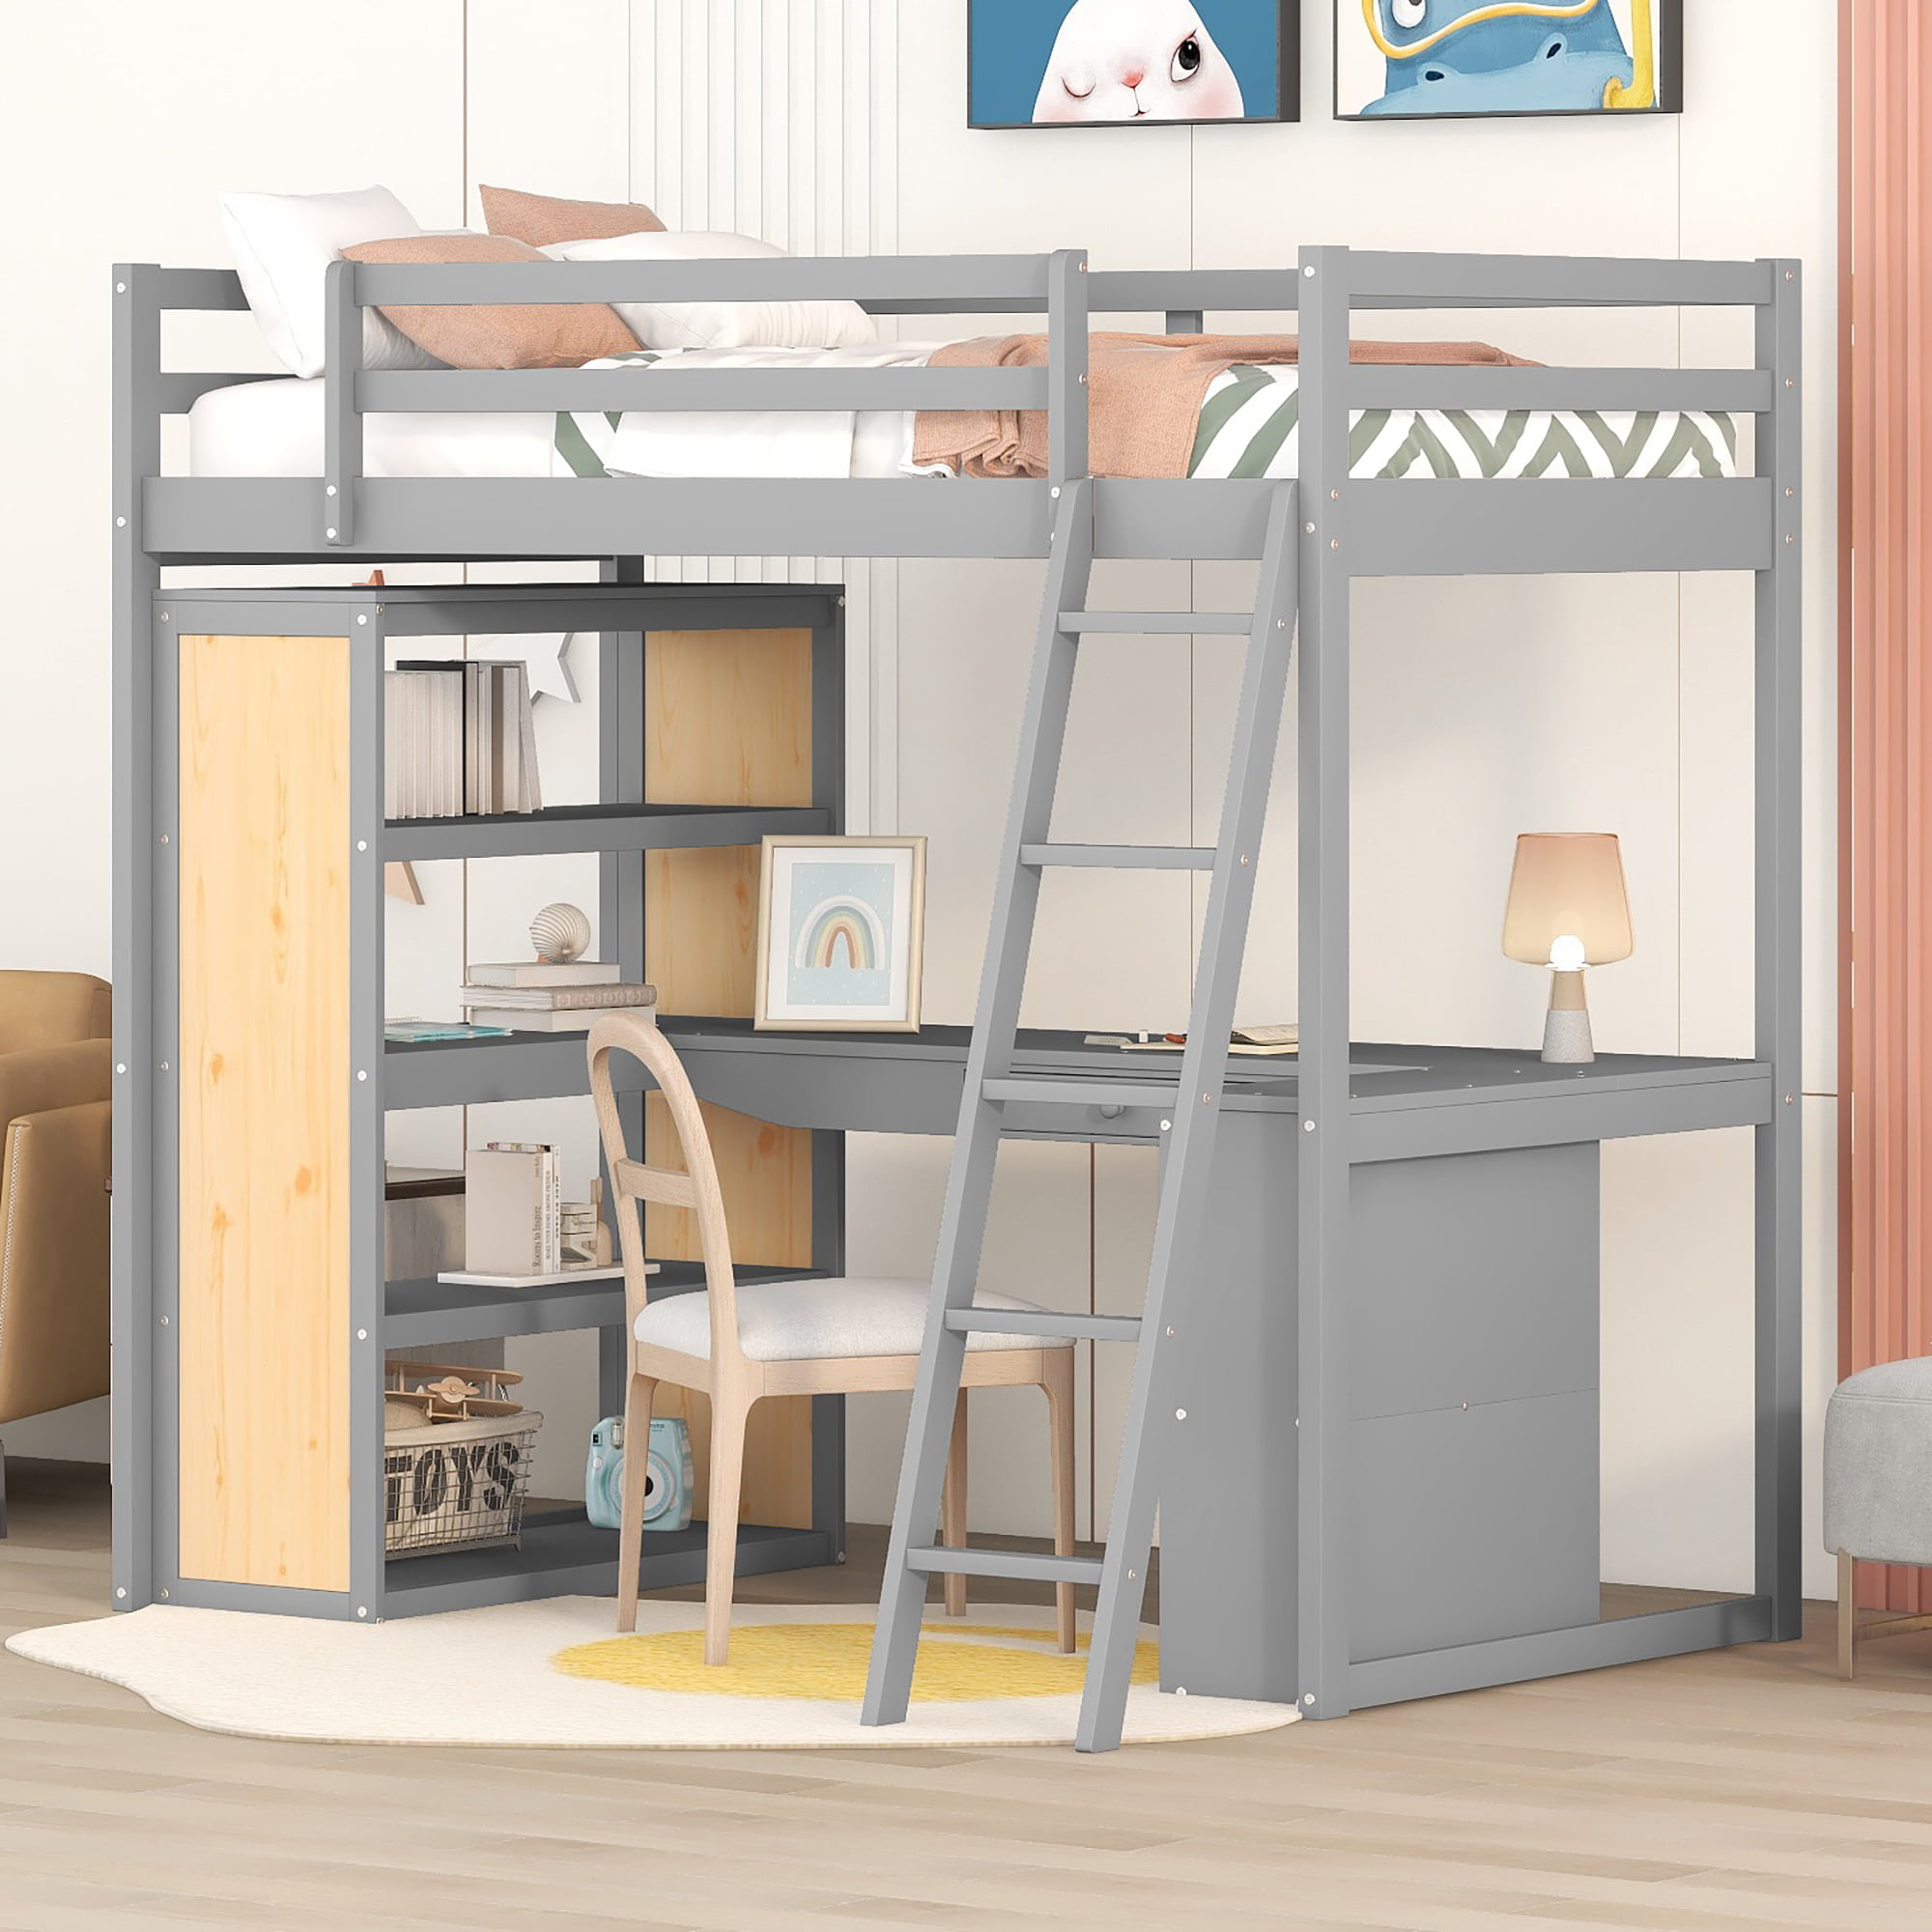 Twin Size Loft Bed With Ladder, Shelves, And Desk, White - LT000225AAE